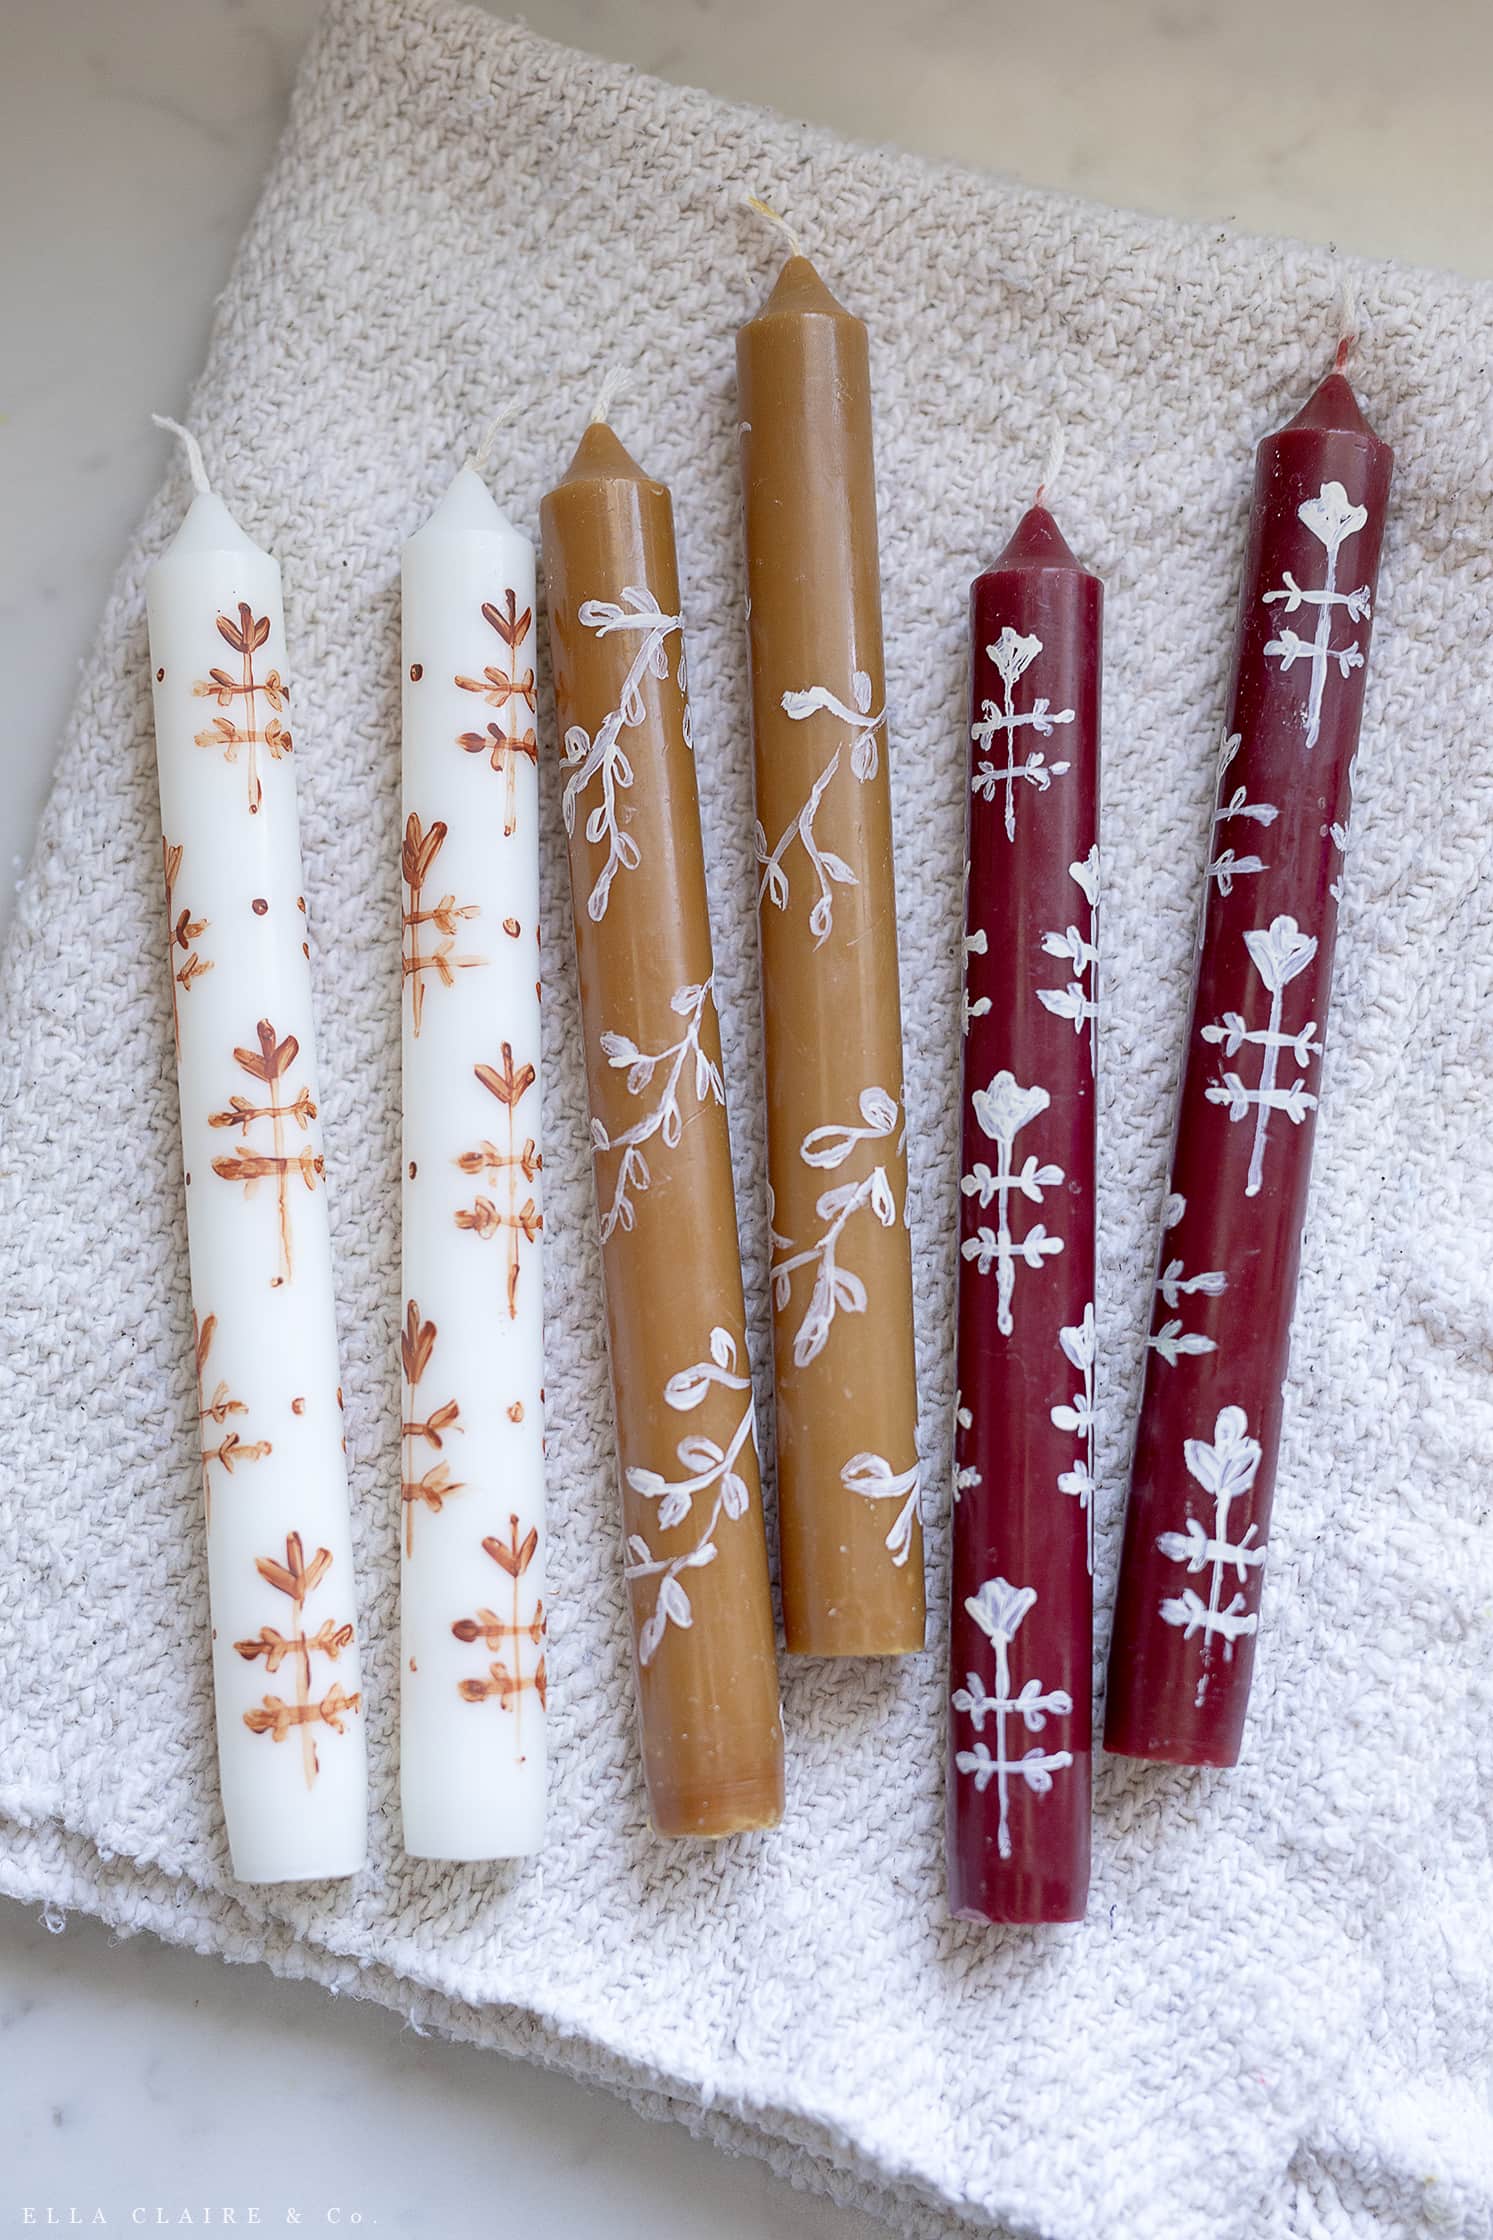 block print and leaves on painted candles